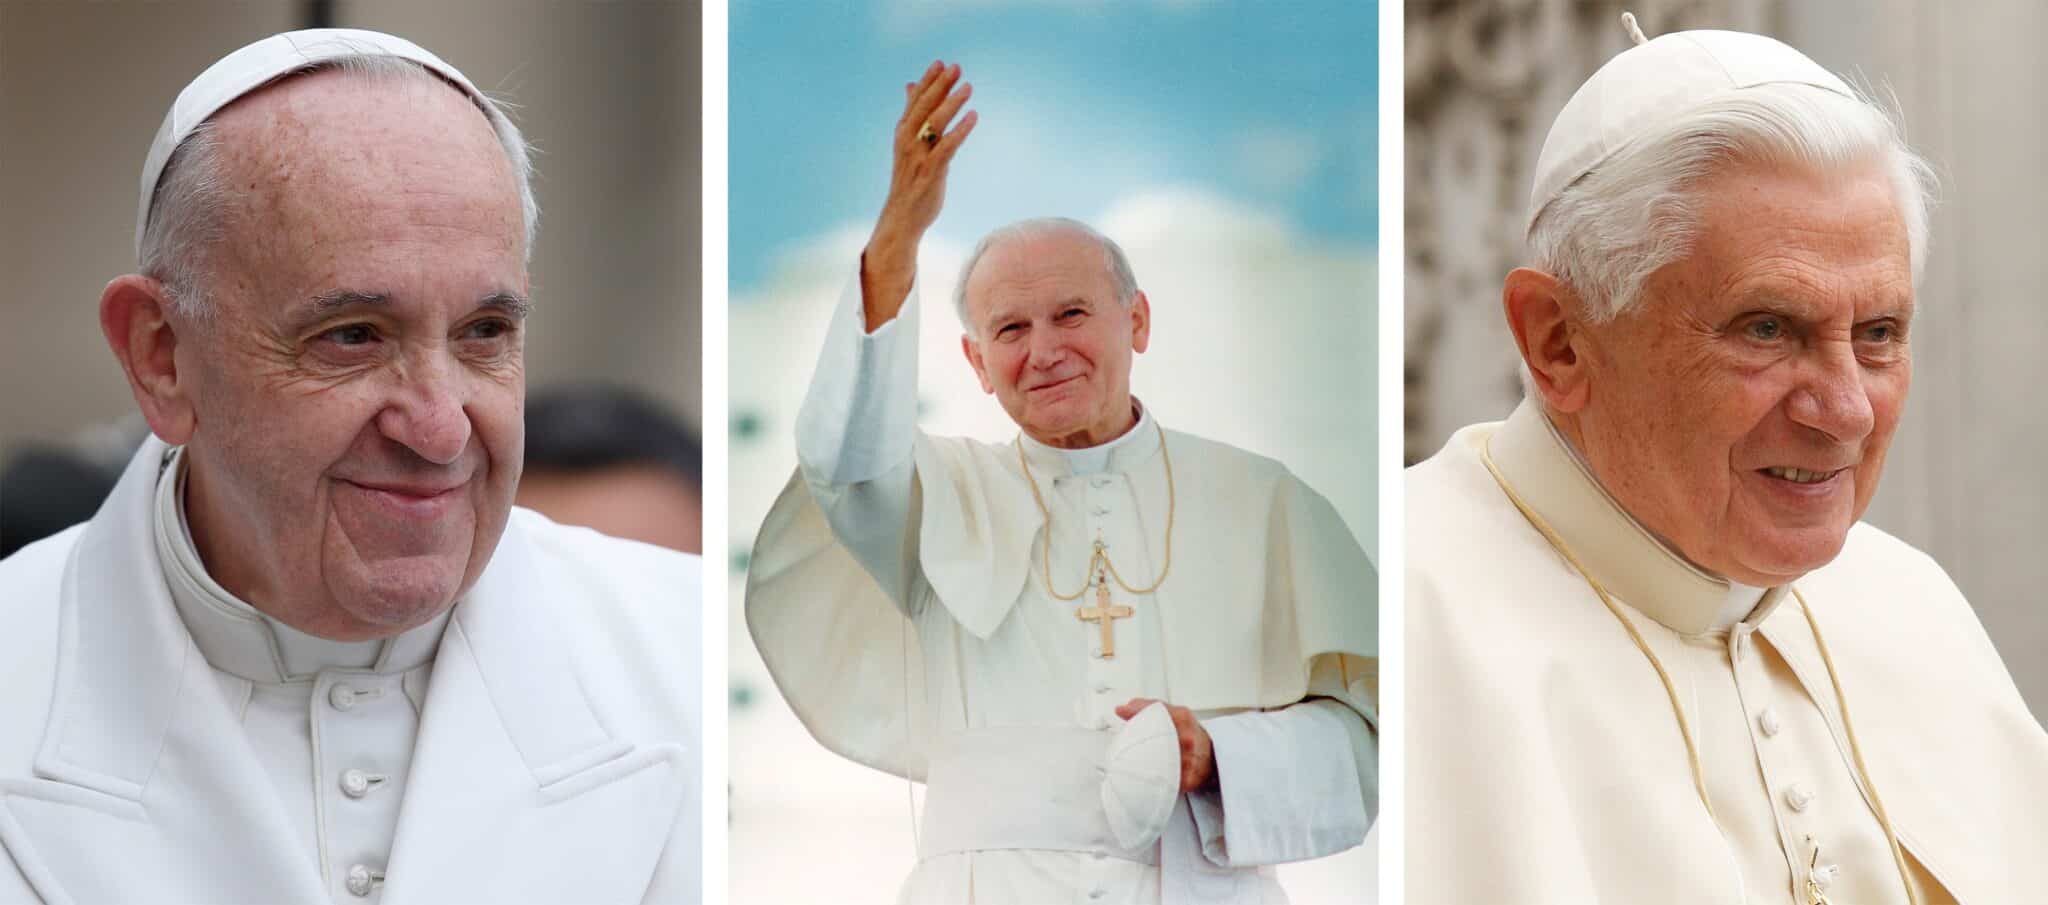 Pope Francis, St. John Paul ll, and Pope Benedict all smiling